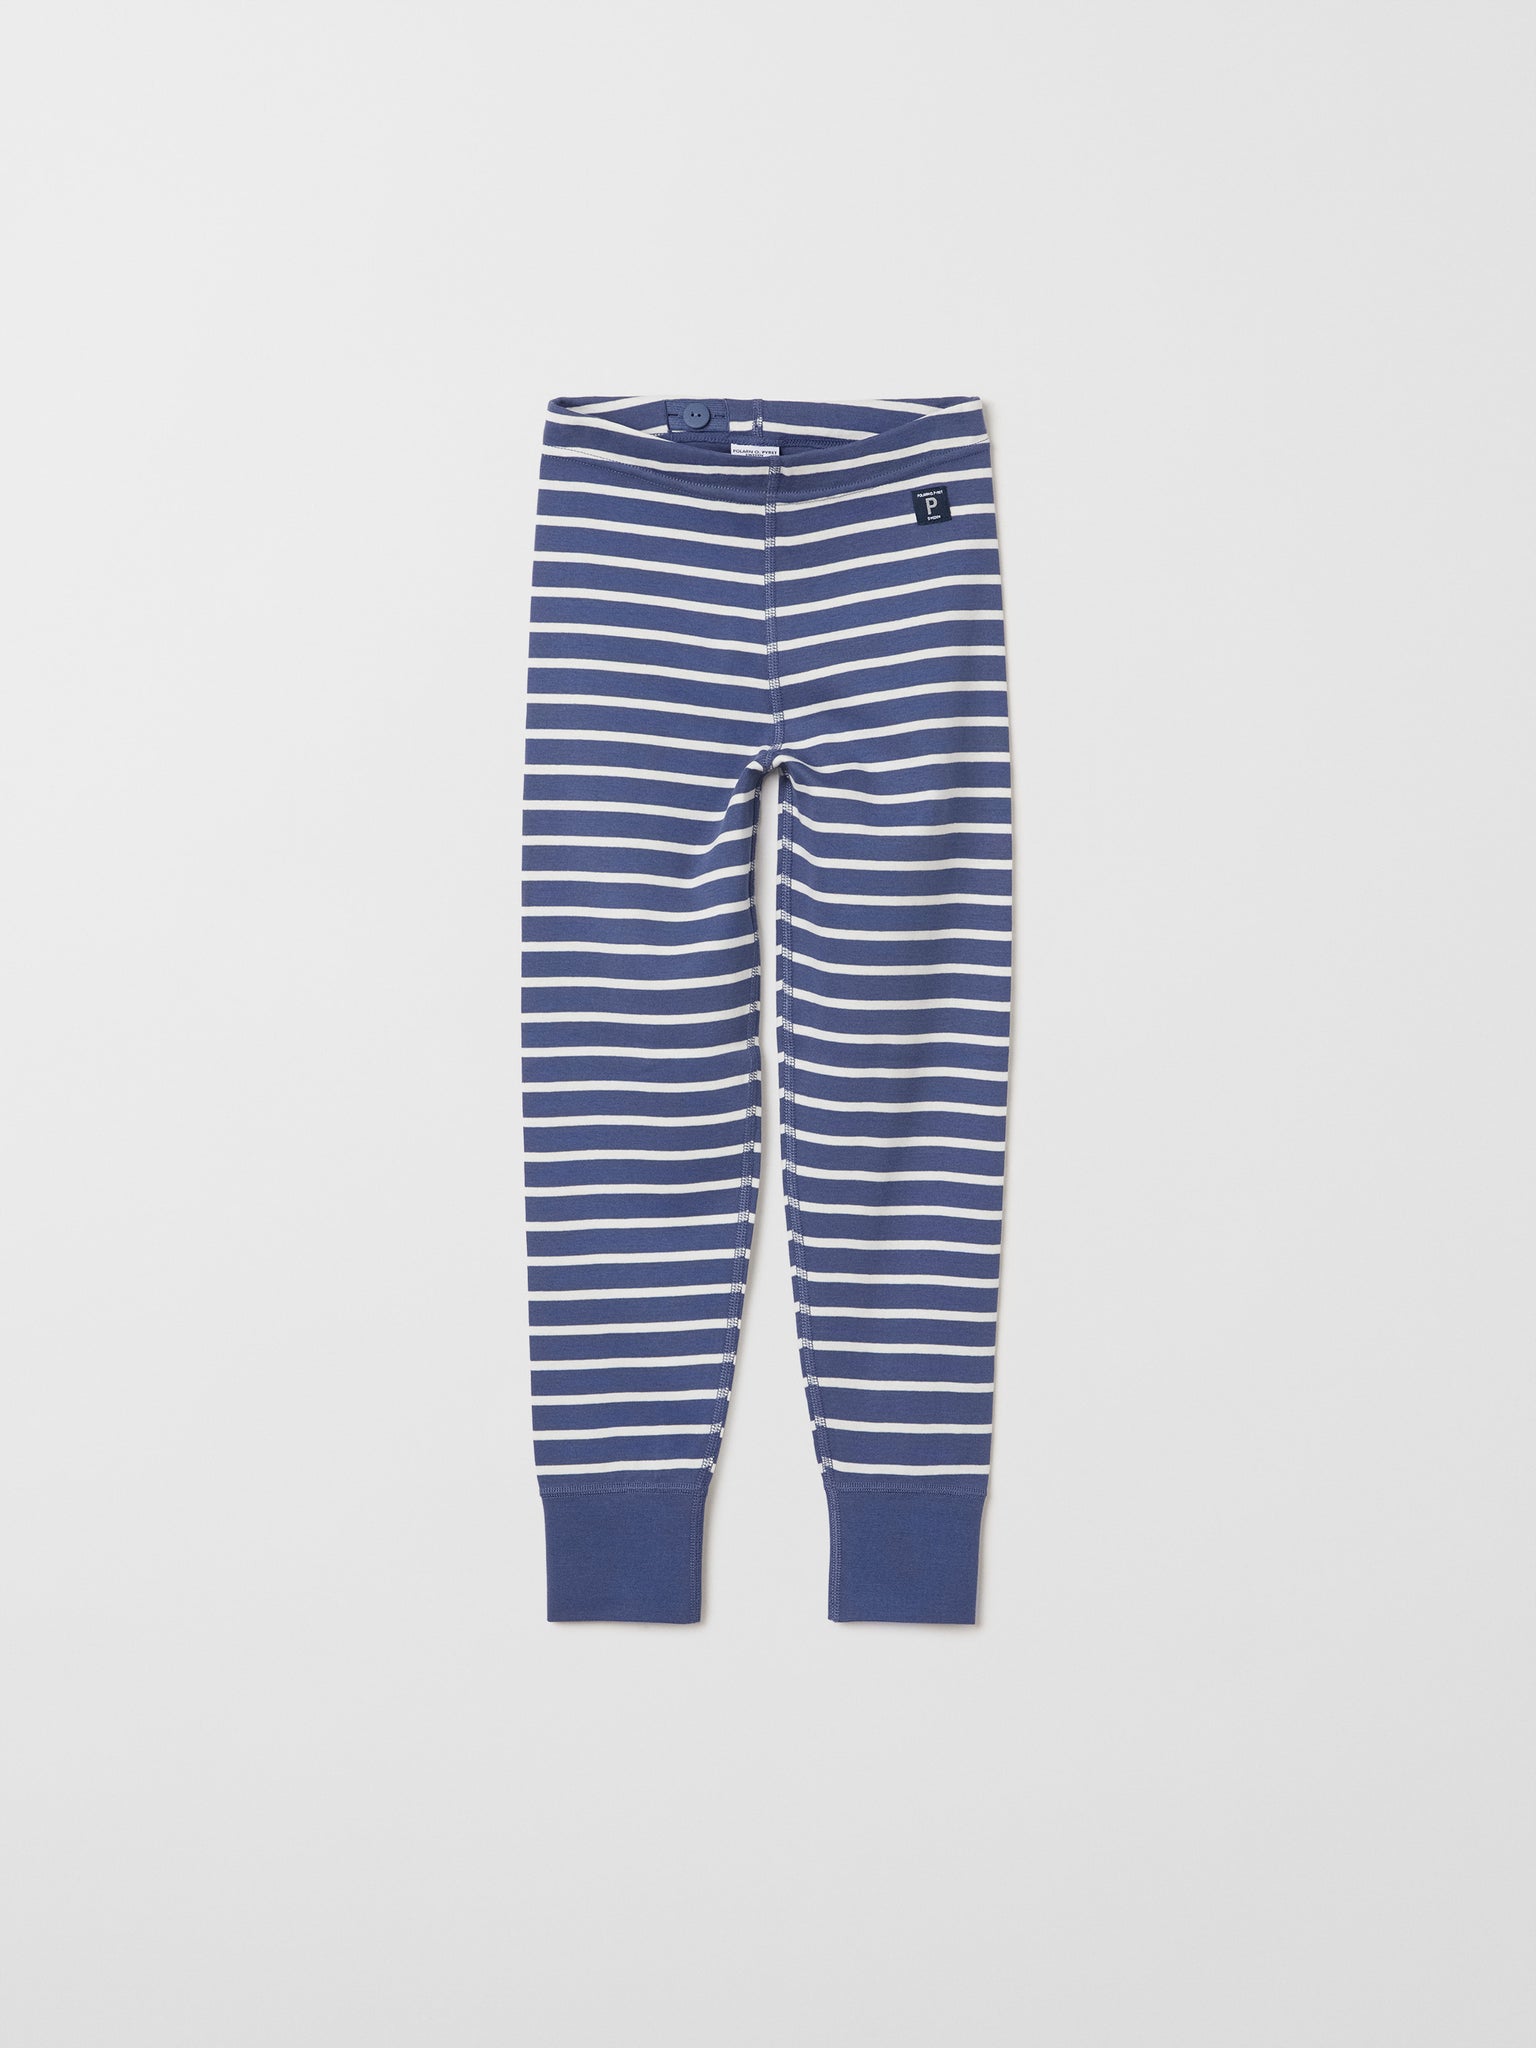 Organic Cotton Blue Kids Leggings from the Polarn O. Pyret kids collection. Ethically produced kids clothing.